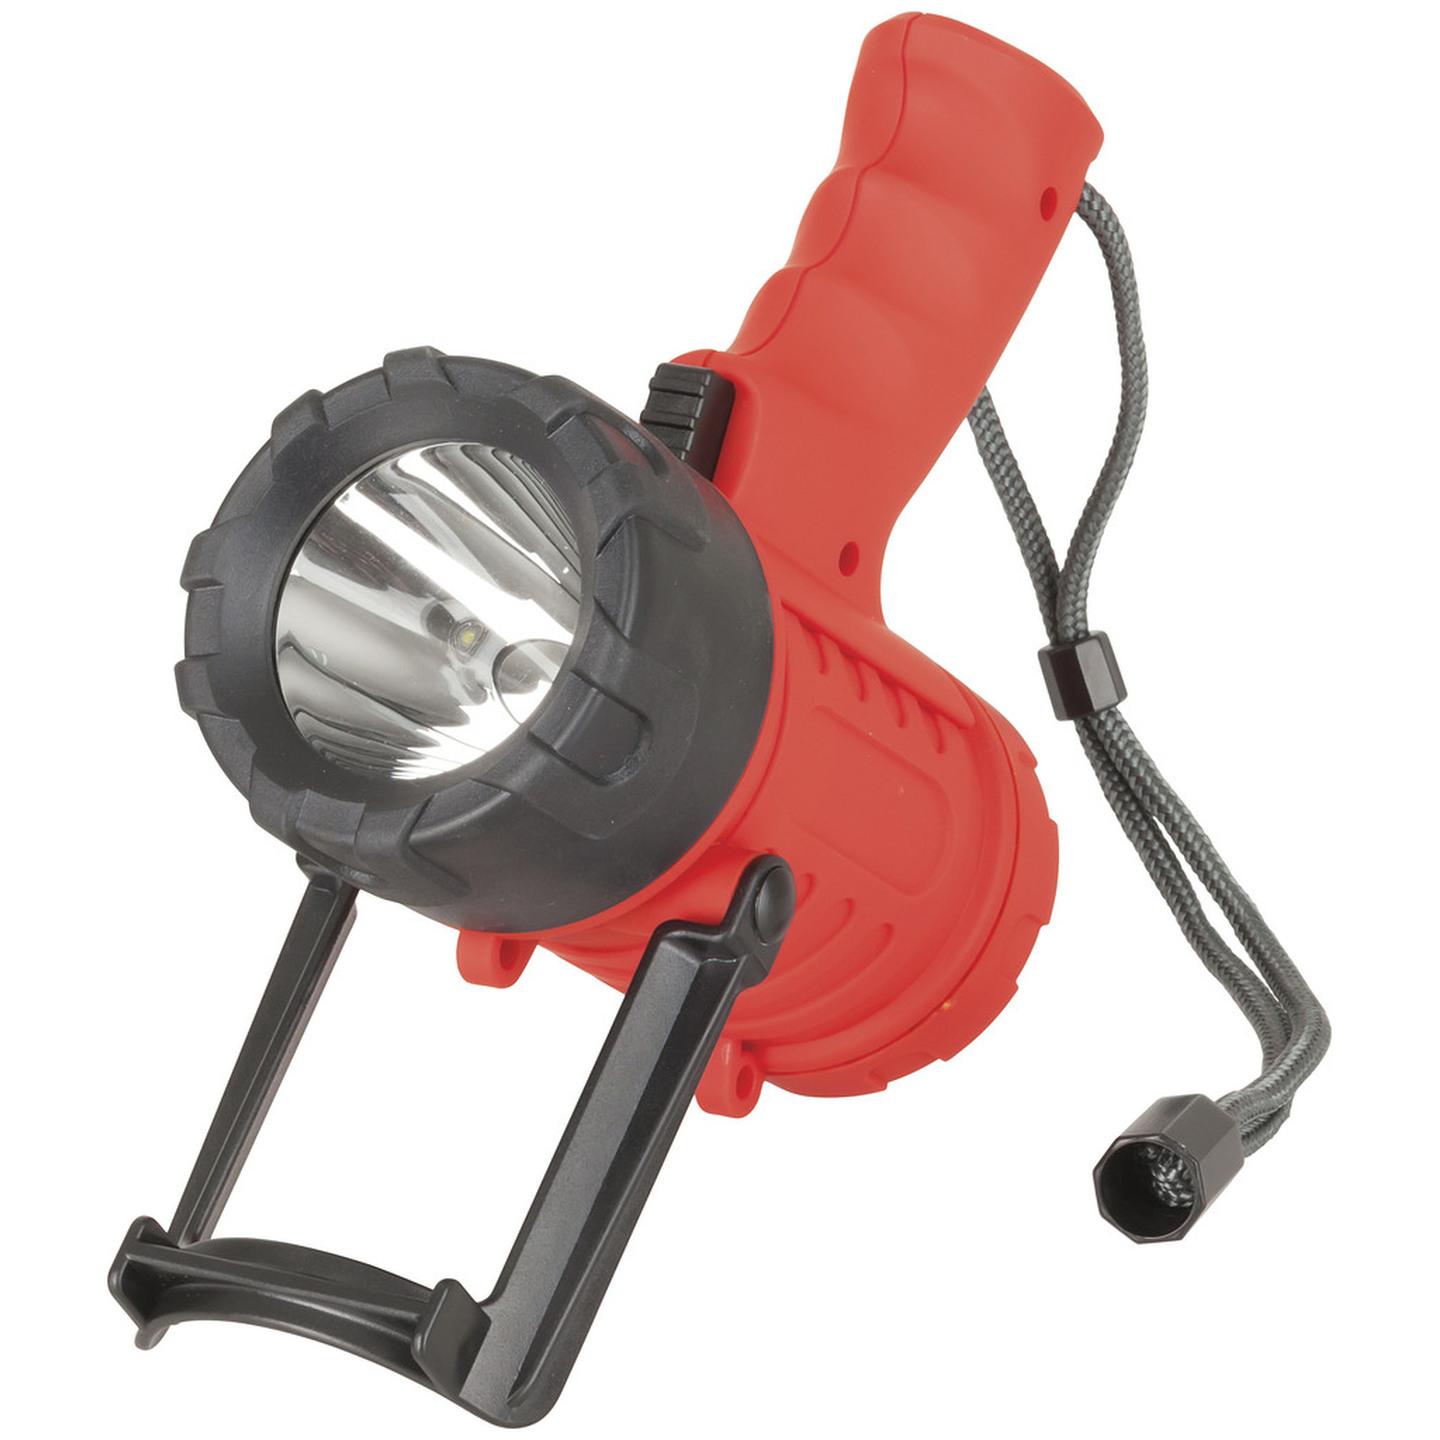 Waterproof 700 Lumen Rechargeable Spotlight with Cree XM-L2 LED